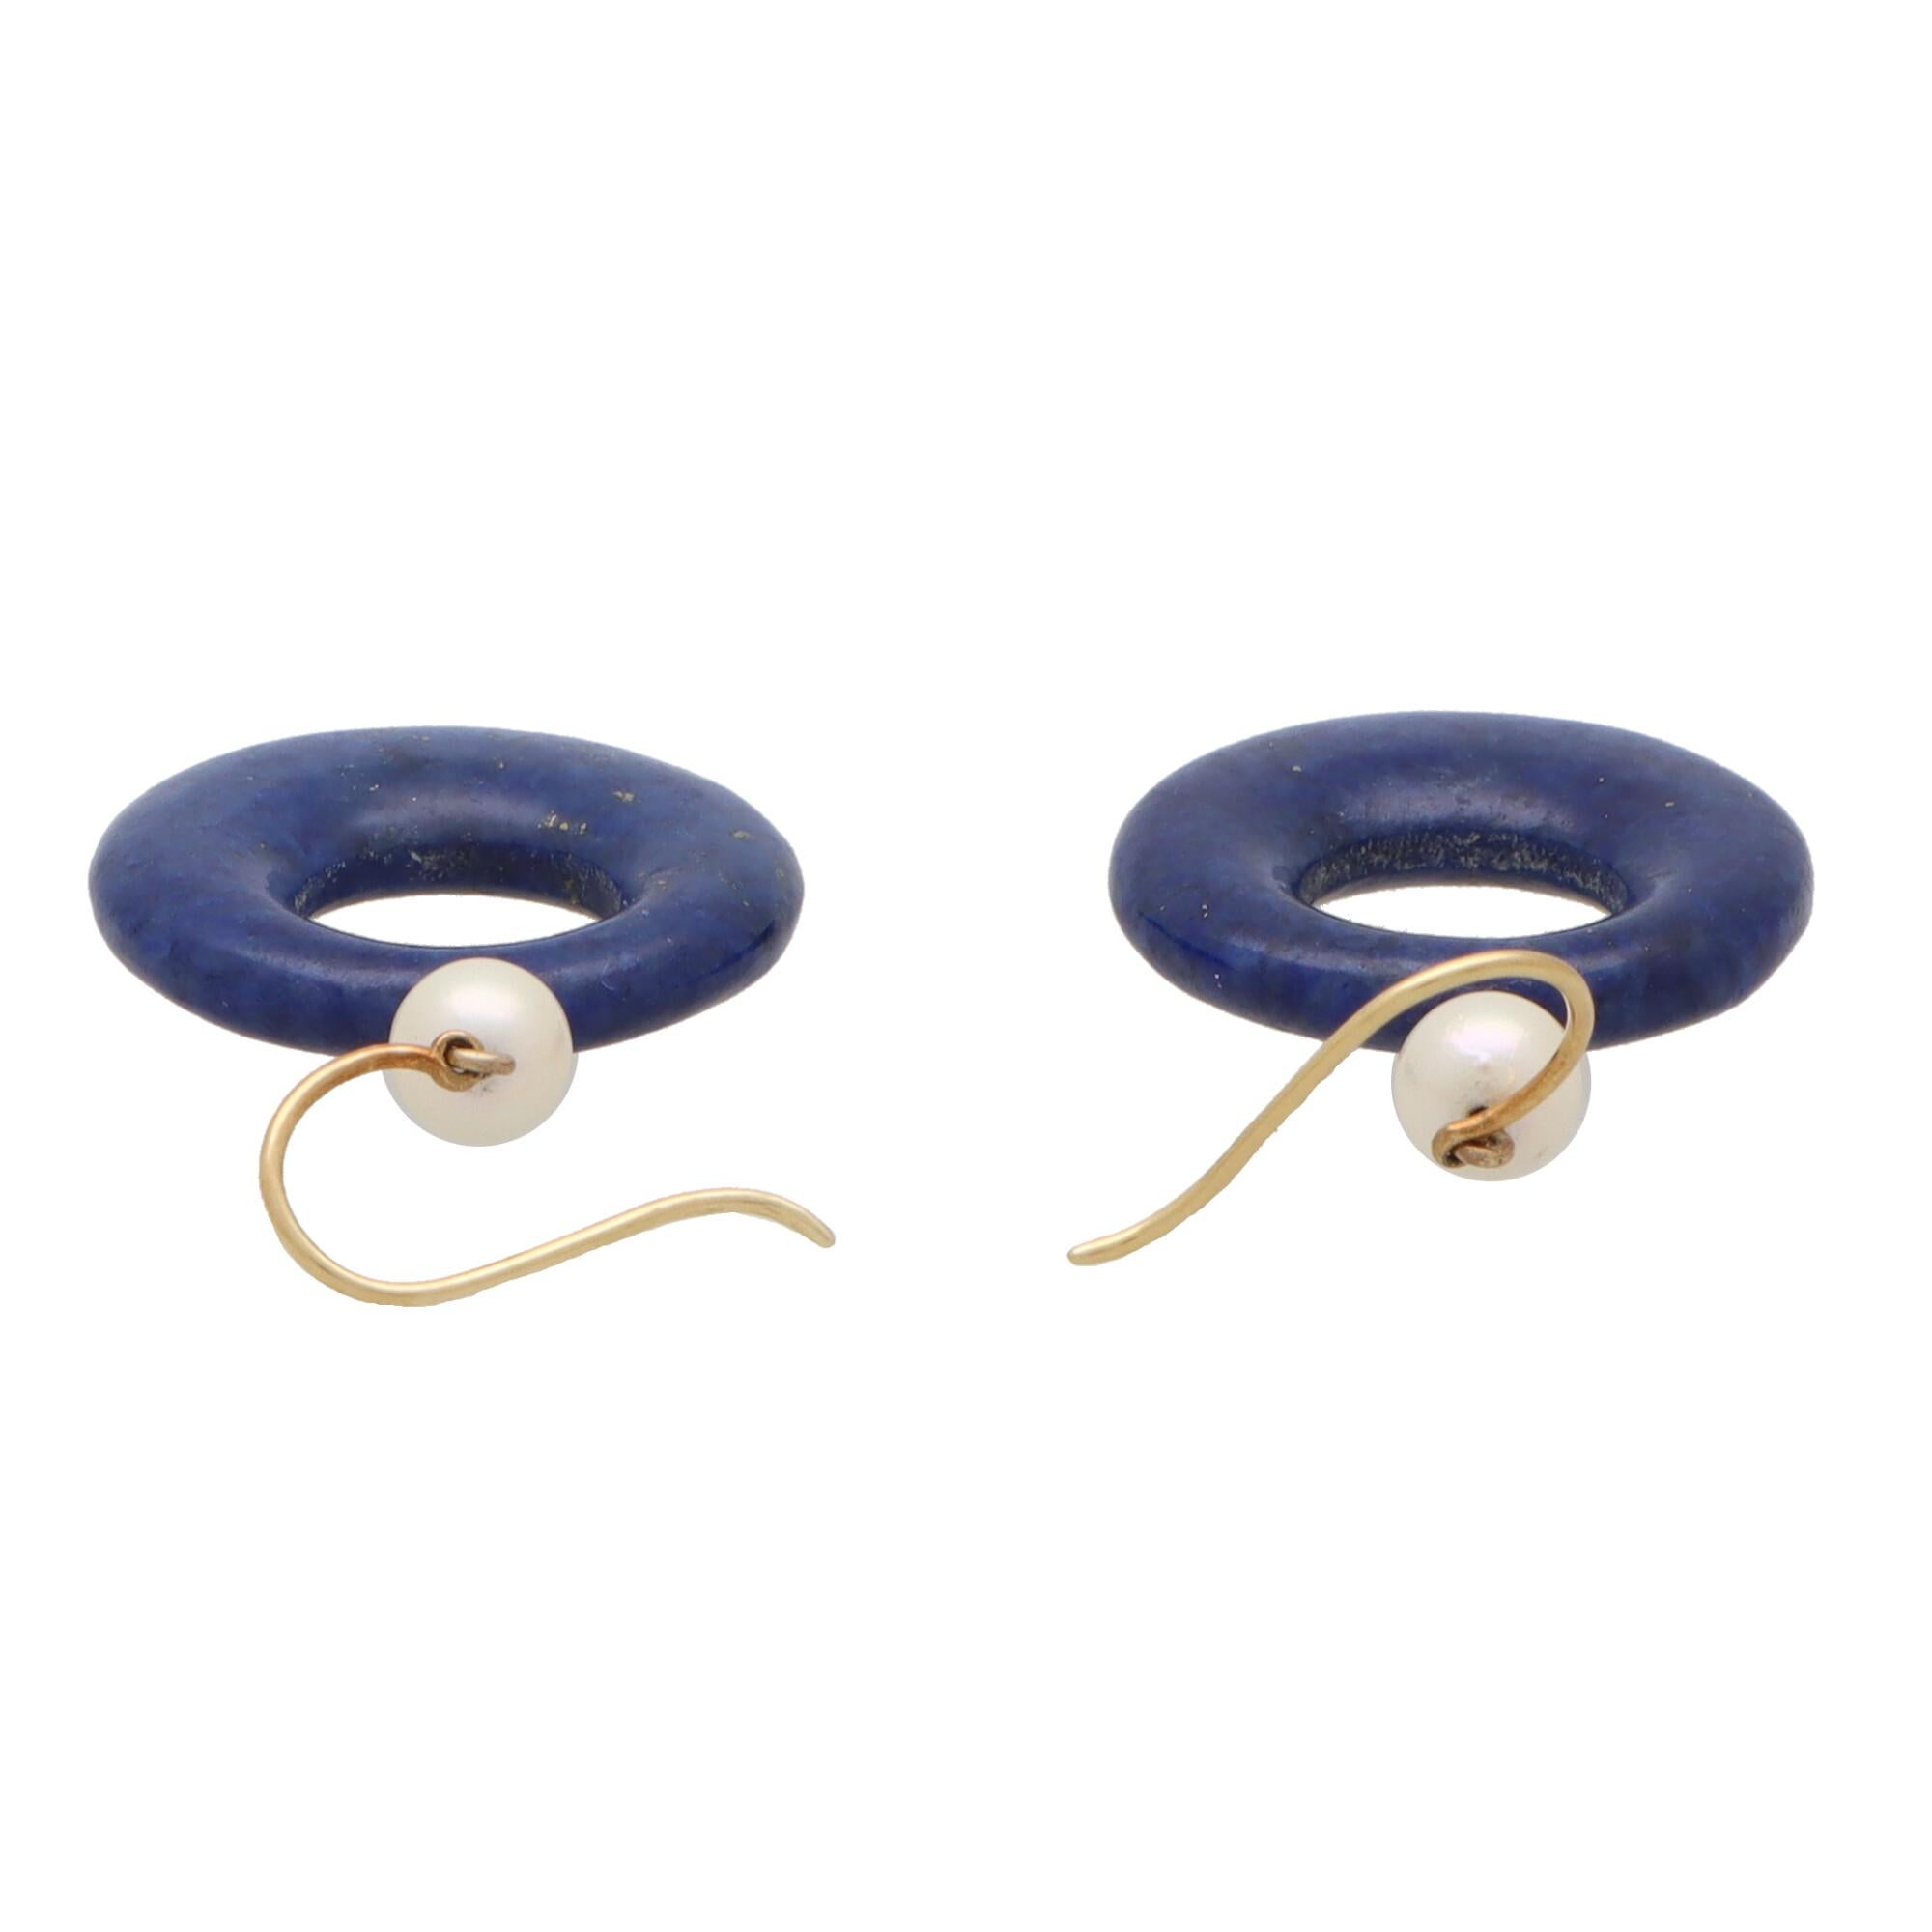 Retro Vintage Pearl and Lapis Lazuli Drop Earrings Set in 18k Yellow Gold